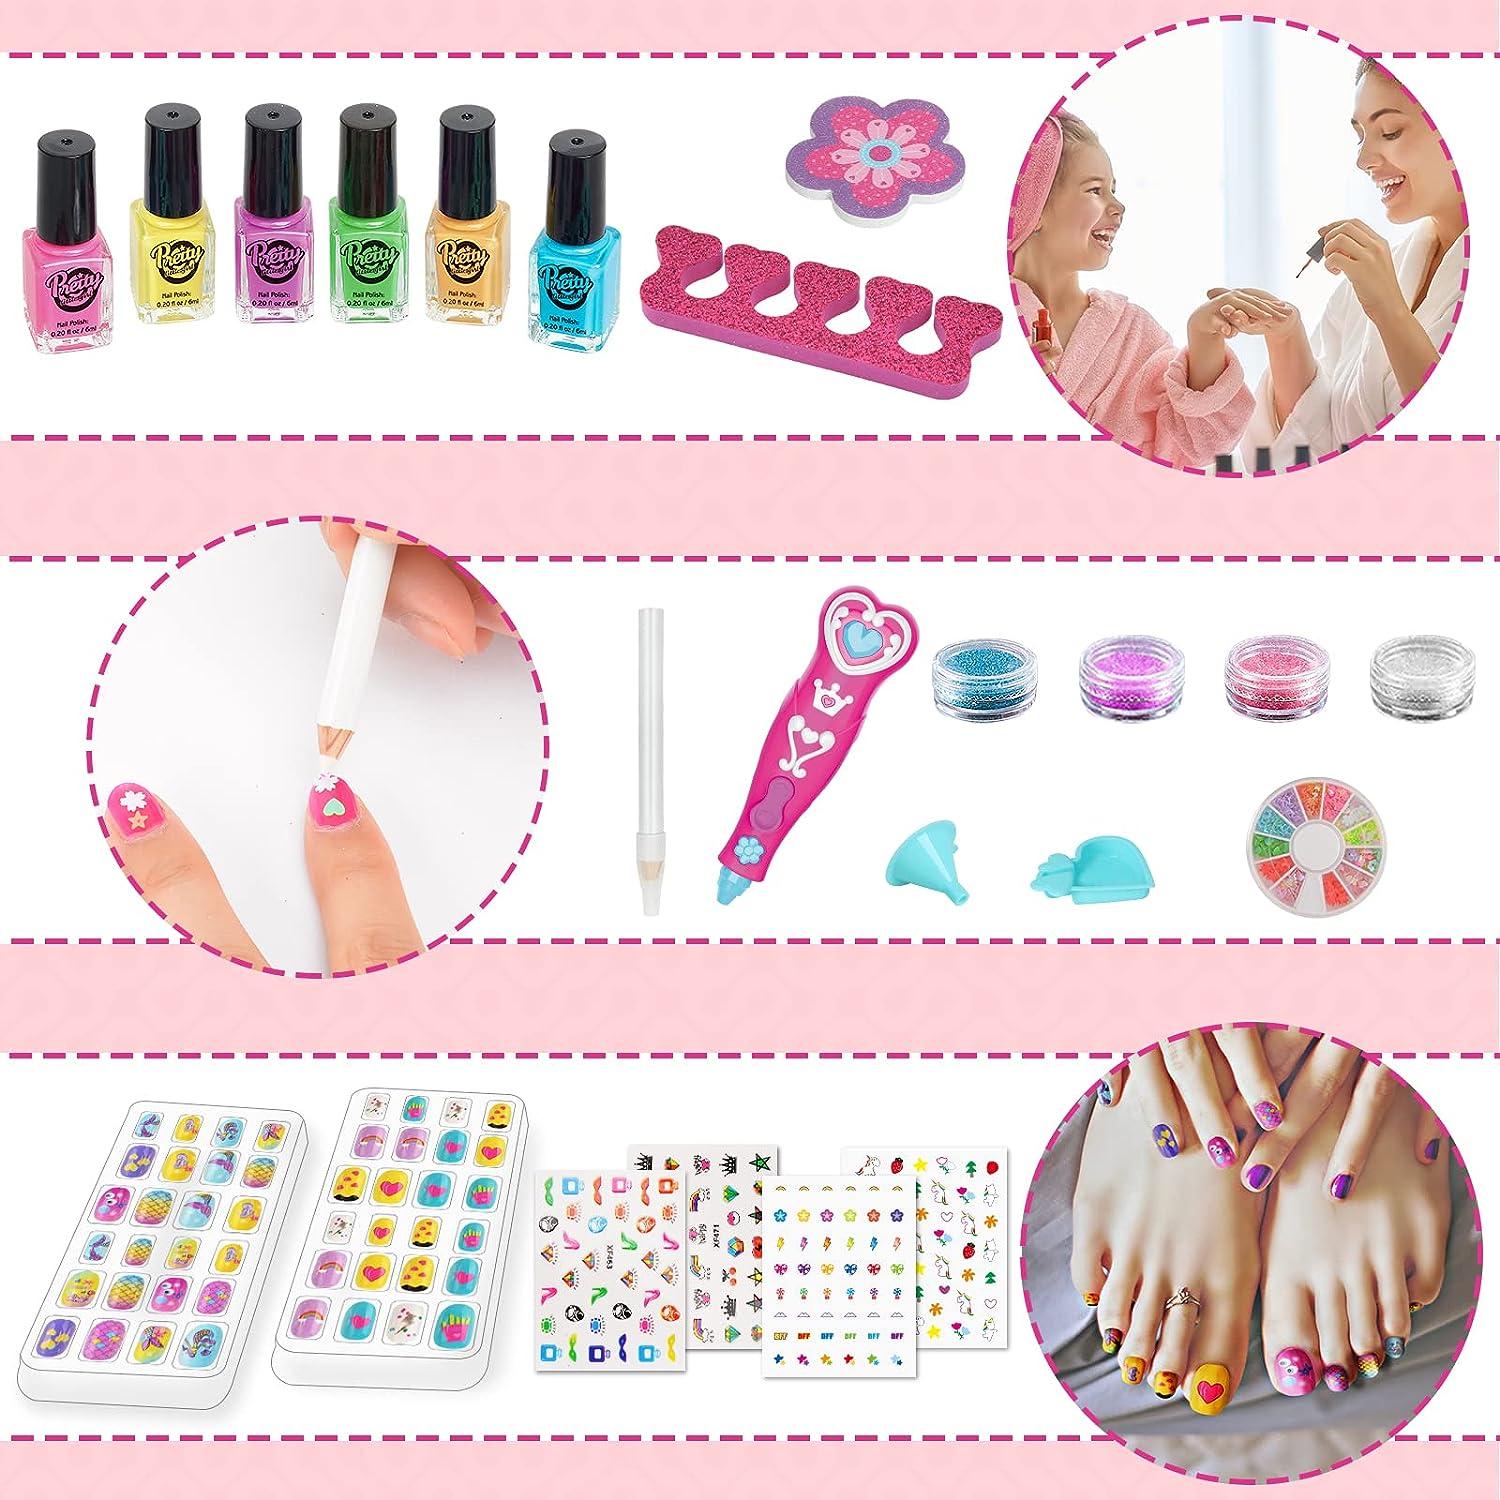 Nail Polish, Nail Art Studio Manicure Set For Girls Art Kit with 12  Artificial Nails, Nail Dotting Pen, Tools and Glitters Birthday Gift for Little  Girls - 15 pcs.